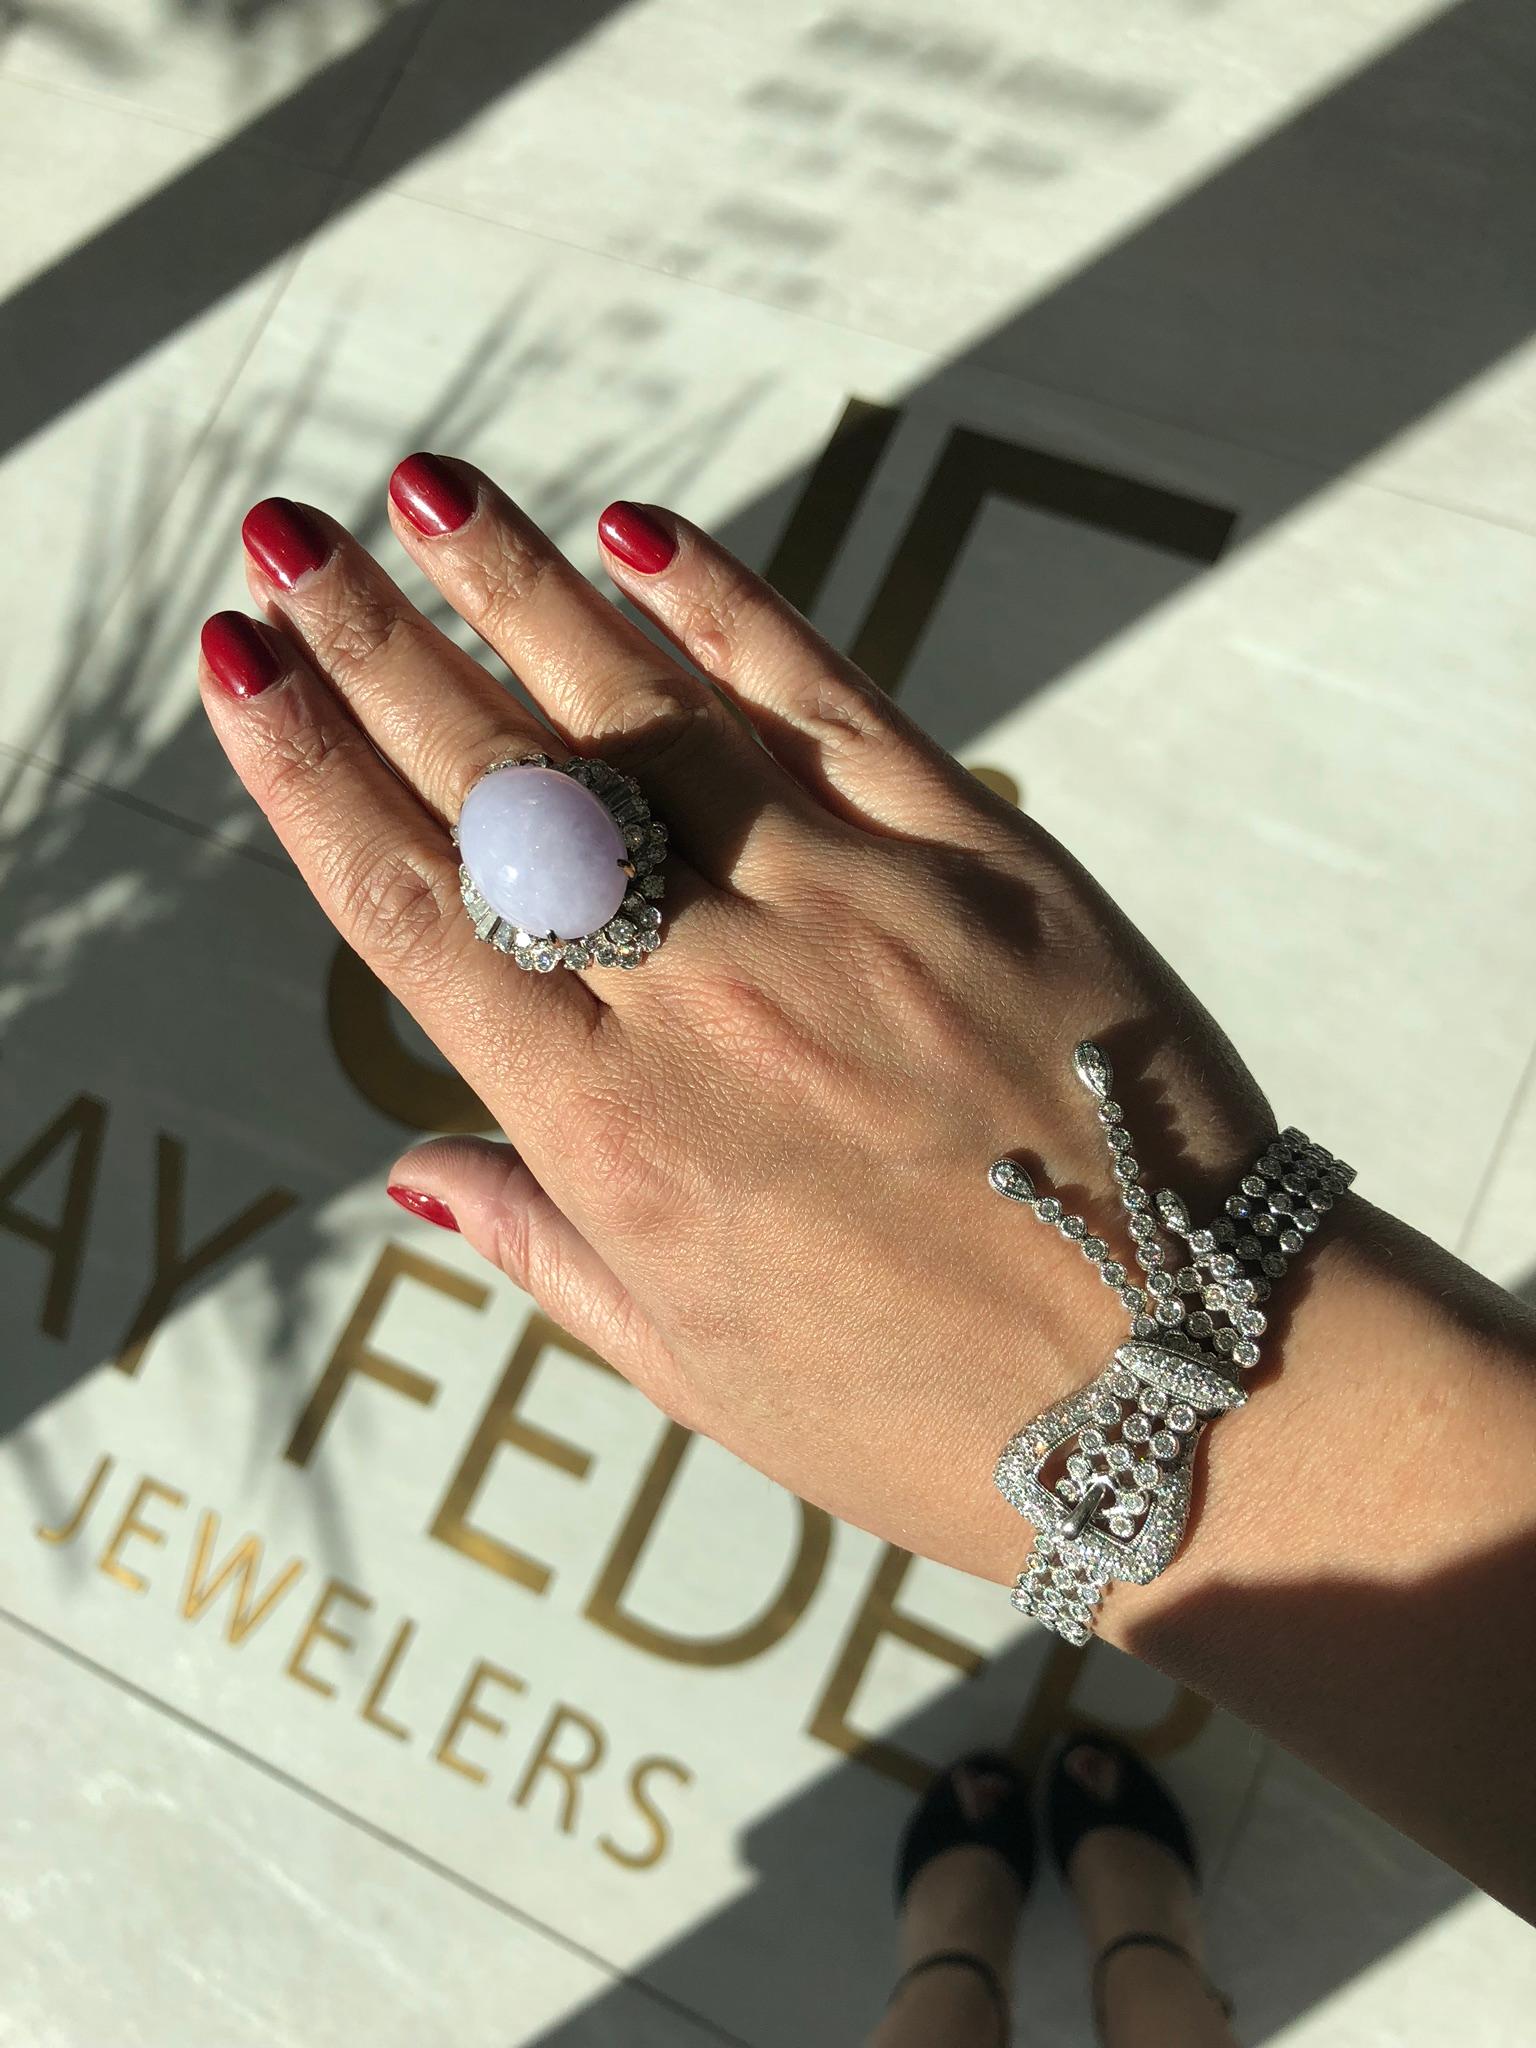 Jay Feder Cabochon Lavender Jade Diamond 14k White Gold Ring In Good Condition For Sale In Boca Raton, FL